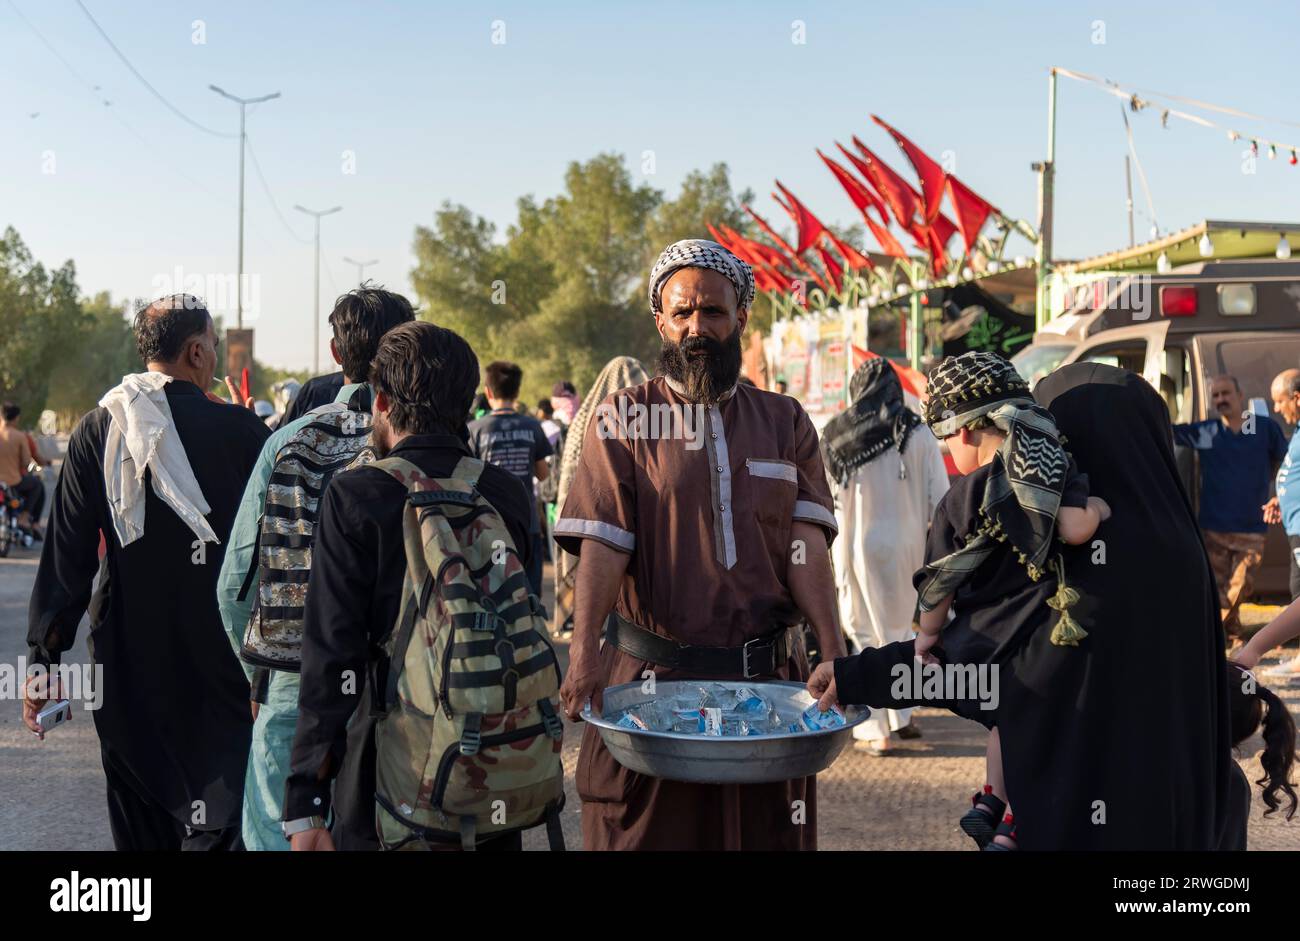 An Iraqi man distribute water among Shia Muslim pilgrims marching from Najaf towards Shrine city of Karbala. Every year, millions of Shia Muslims and some from other faiths undertake a 20-day pilgrimage on foot from various cities in Iraq and Iran to the holy city of Karbala. This pilgrimage is in remembrance of Imam Hussein, the grandson of the Prophet Muhammad, who died in a battle in 680 AD. On the 40th day of mourning for Hussein, known as Arbaeen, pilgrims converge in Karbala to pay tribute at his shrine. Along the way, volunteers provide food, water, and shelter, and villagers open their Stock Photo